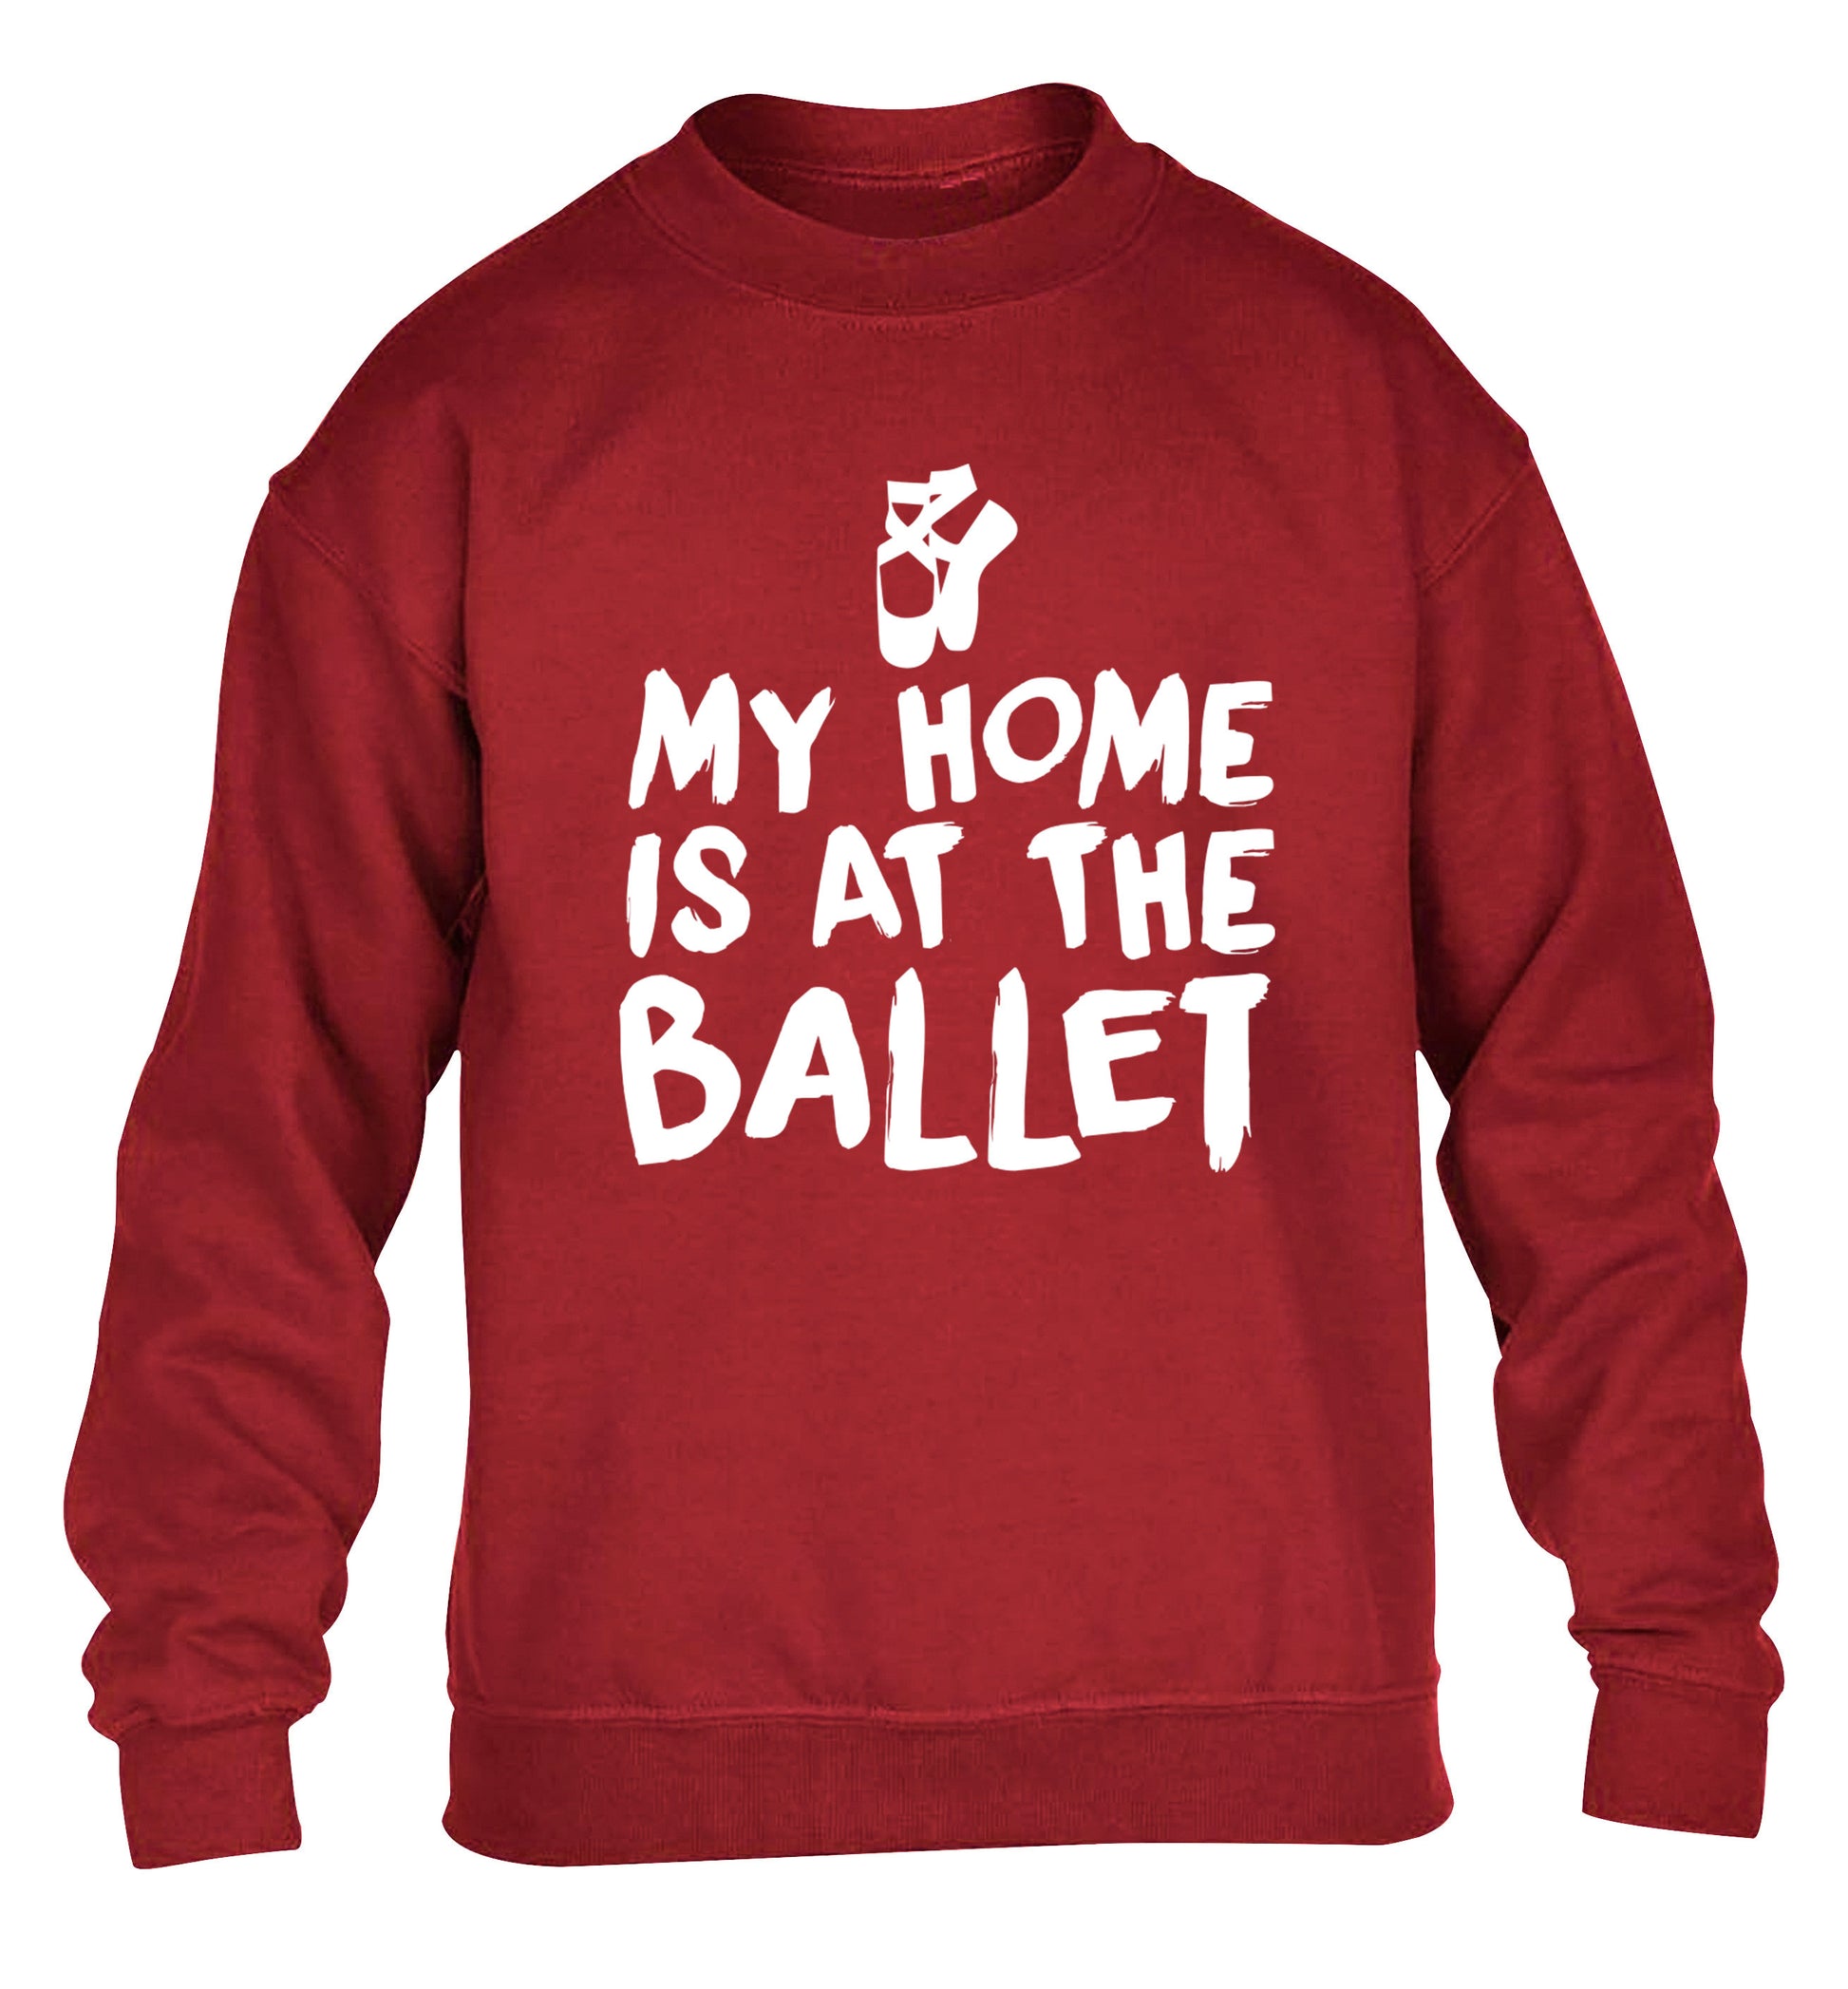 My home is at the dance studio children's grey sweater 12-14 Years